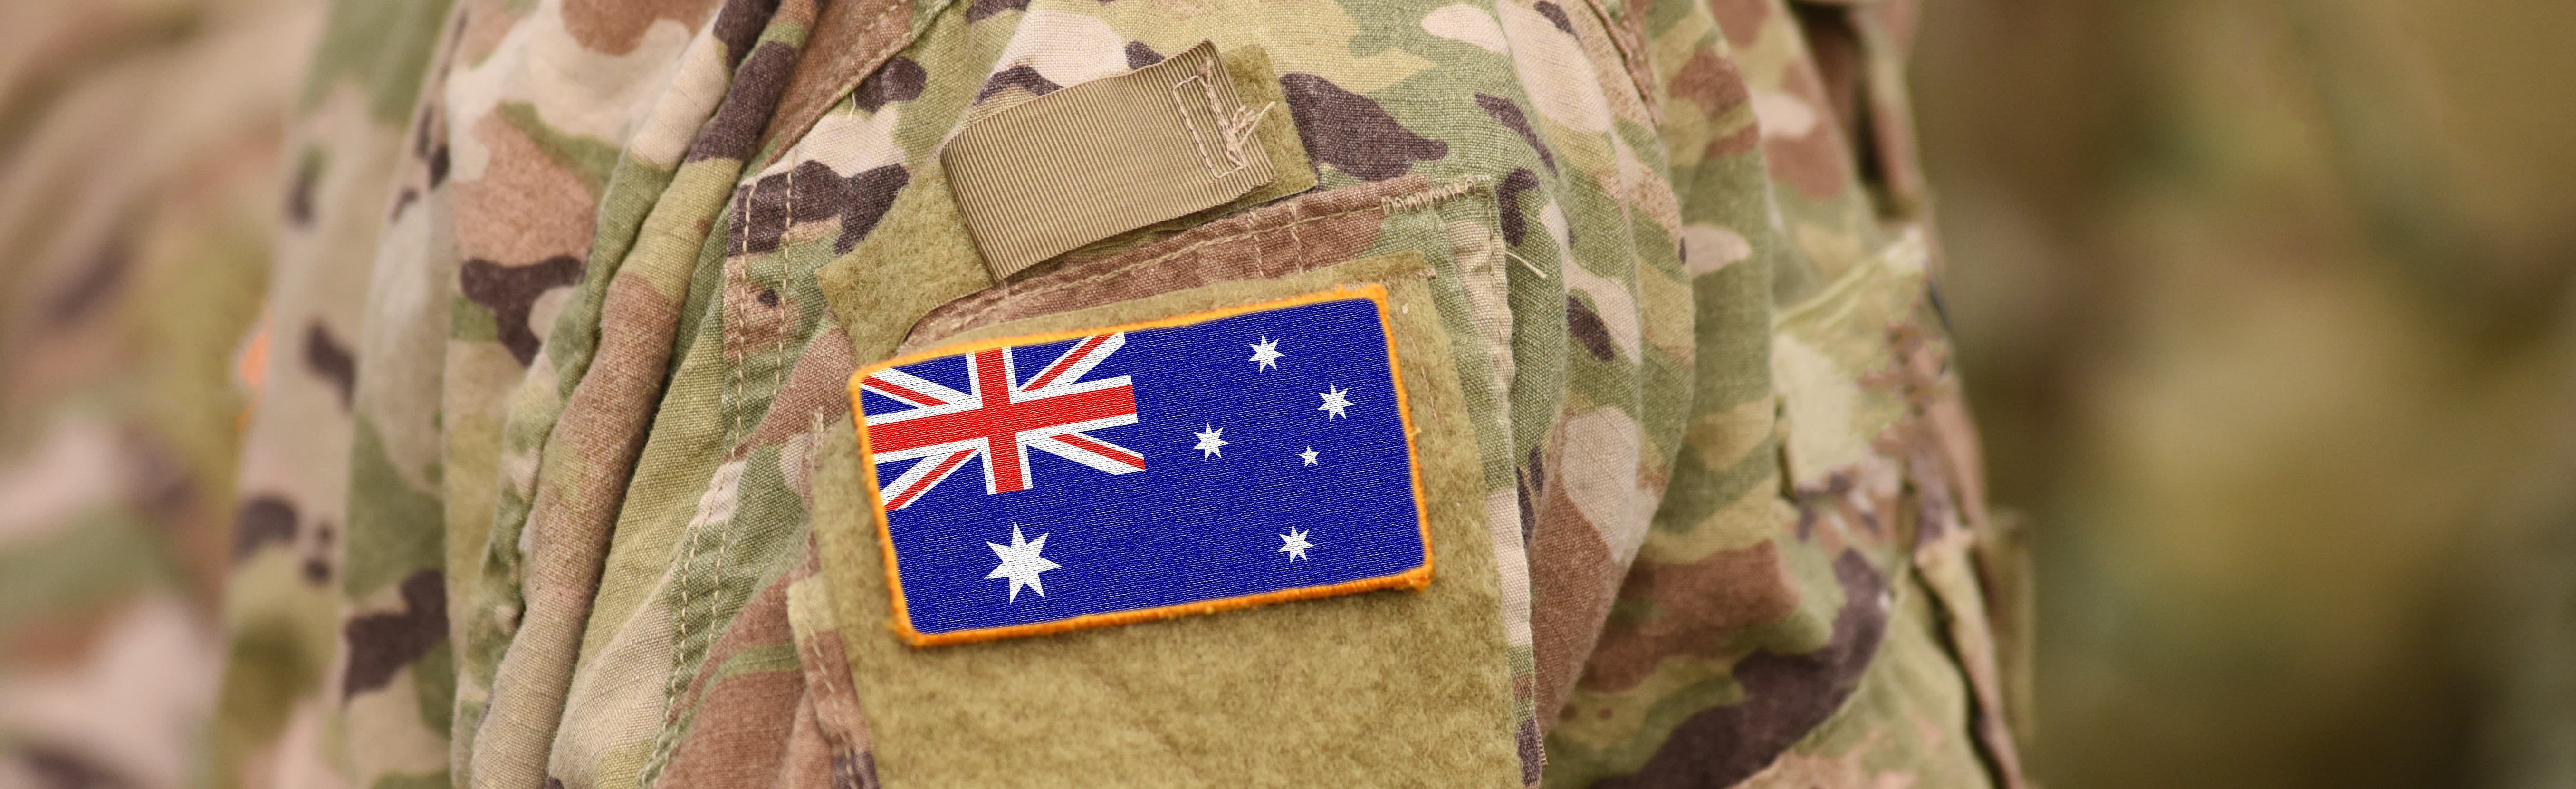 Veterans Scholar Scheme supports current and former ADF members